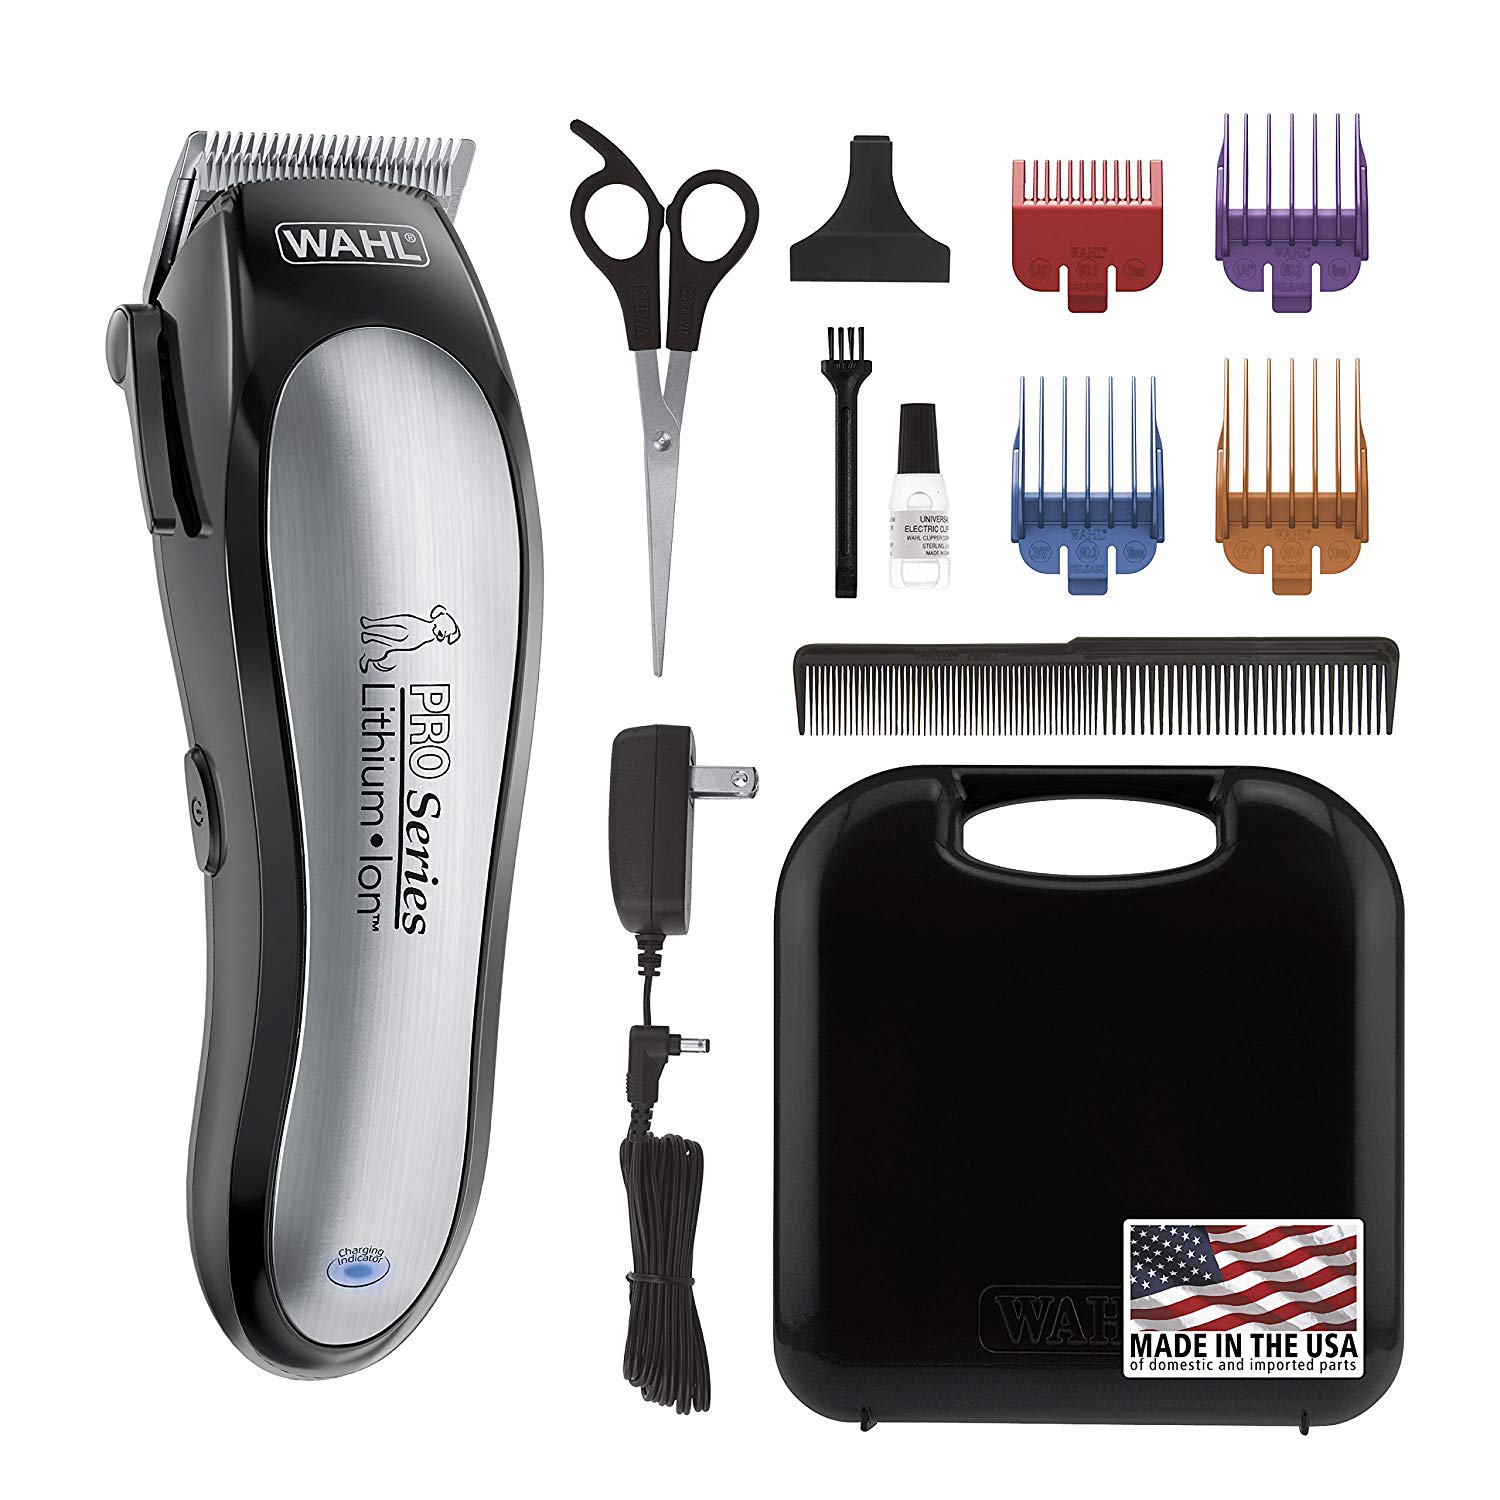 WAHL Lithium Ion Pro Series Cordless Dog Clippers, Rechargeable Low Noise